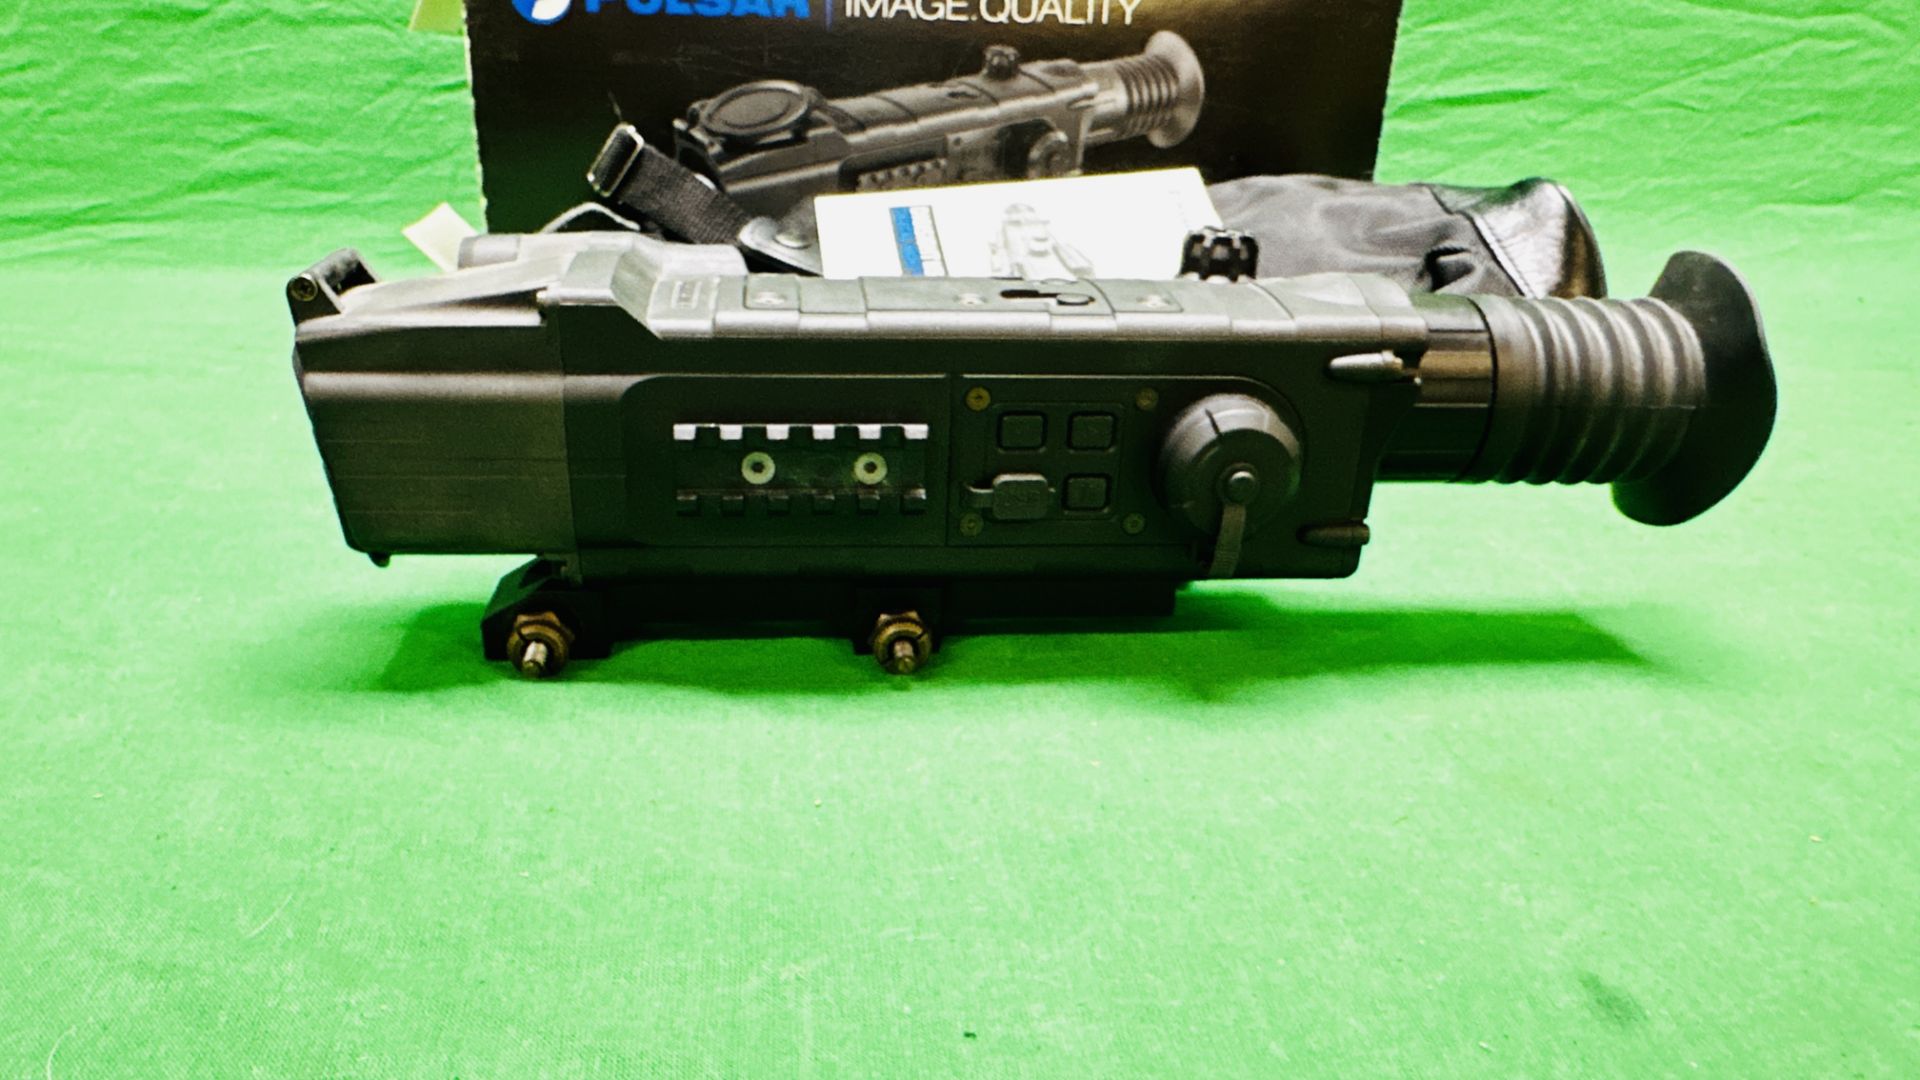 A PULSAR DIGISIGHT RIFLE SCOPE MODEL N550 BOXED WITH BATTERY PACK AND BAG. - Image 8 of 17